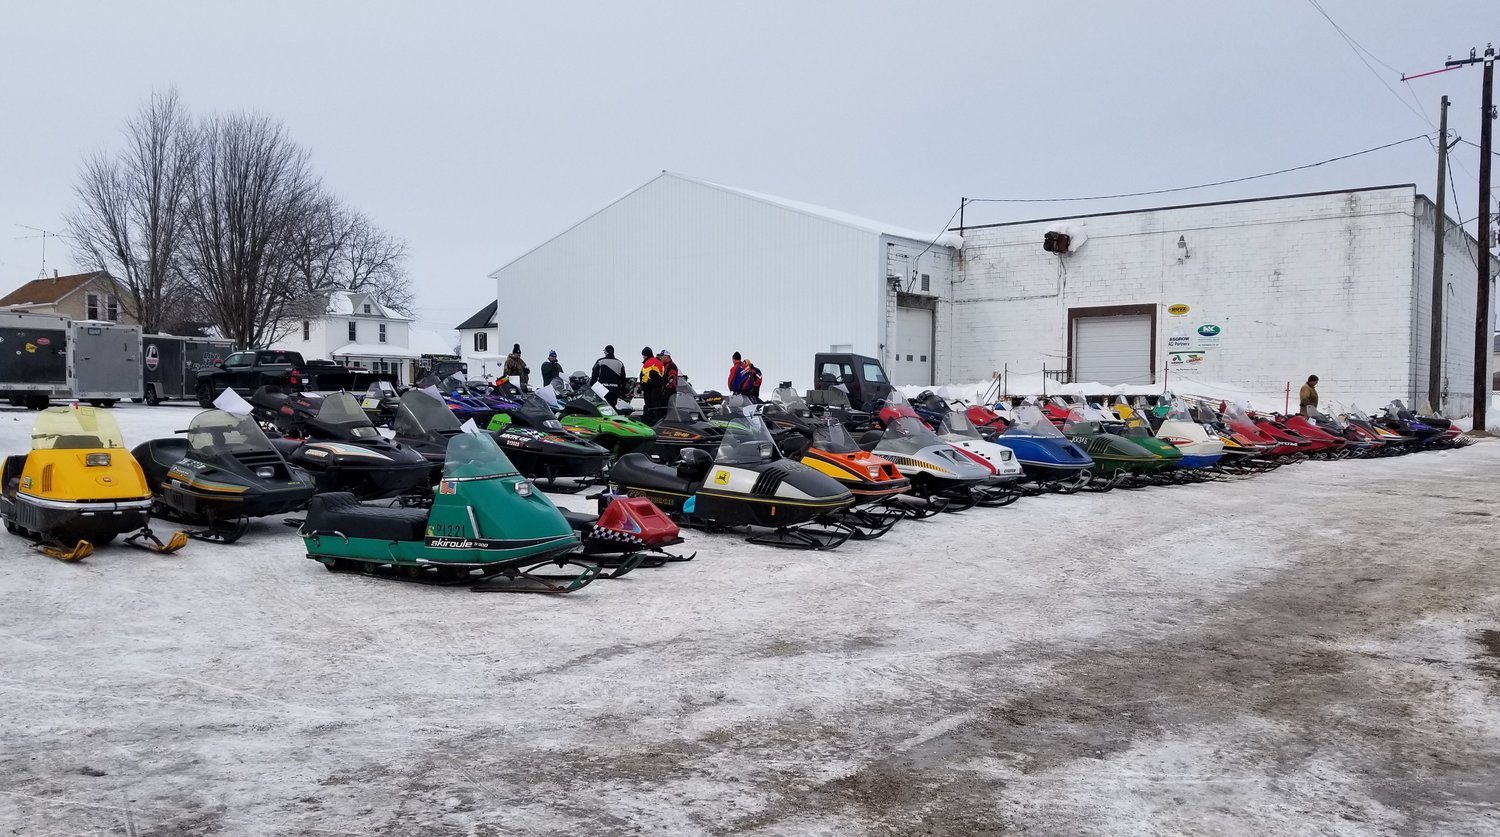 66 Vintage sleds were officially registered for the competition and on display in the Lion's parking lot.